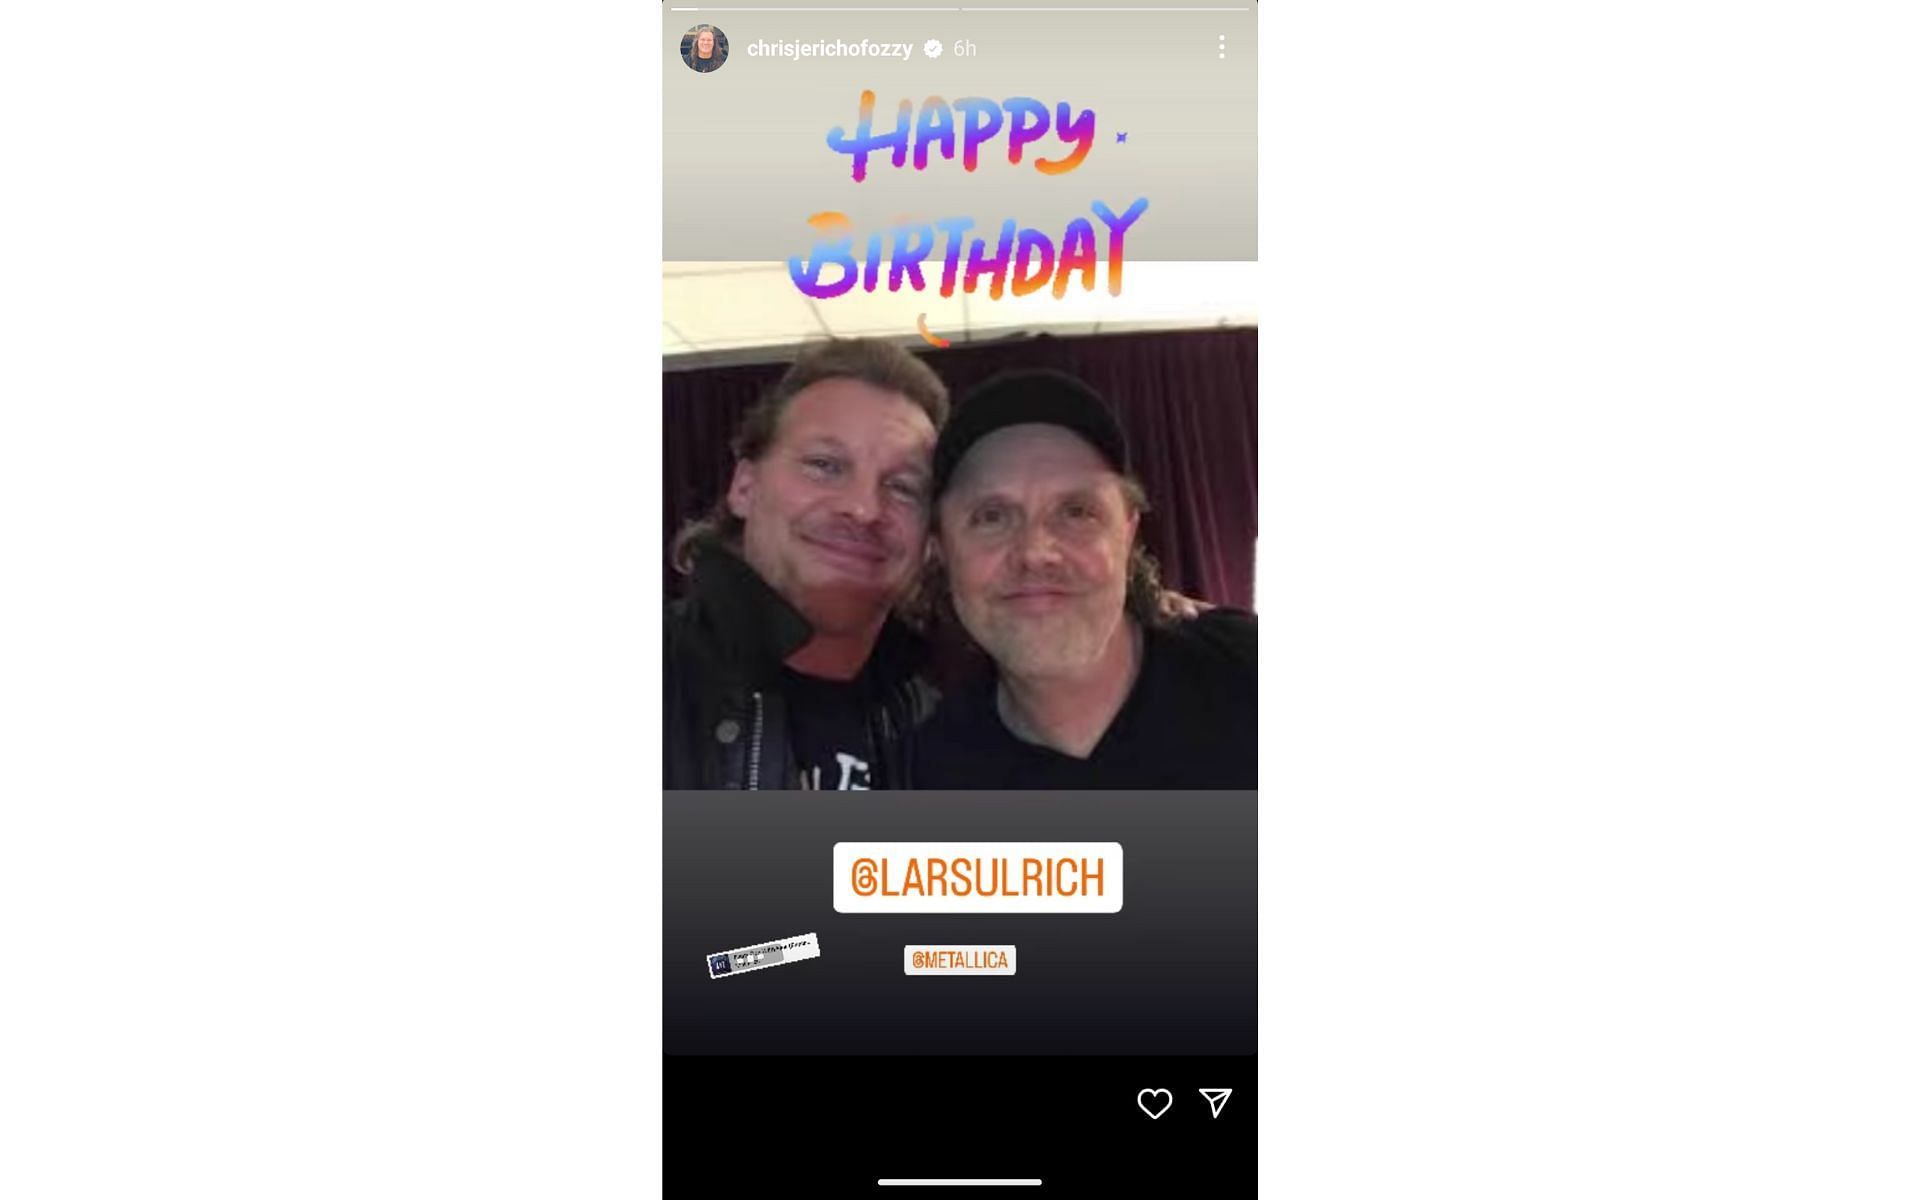 Chris Jericho shared a throwback image with Lars Ulrich on Instagram